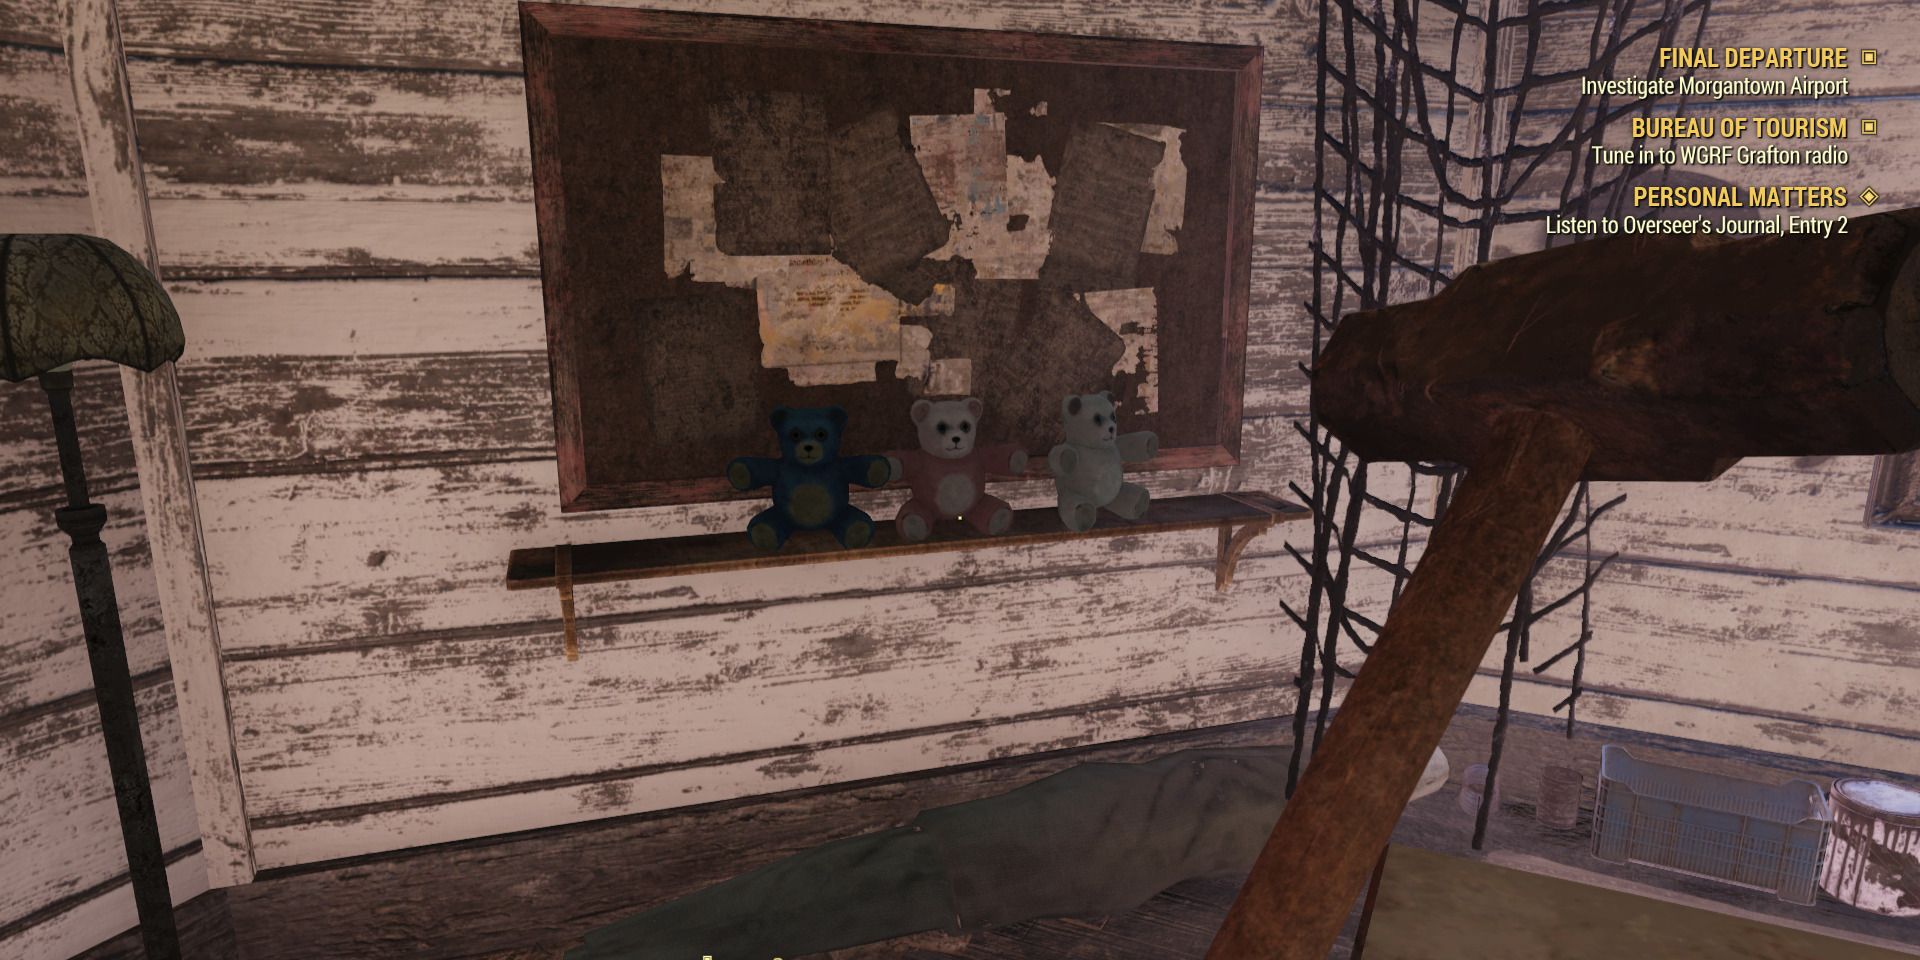 Image of three teddy bears in Fallout 76